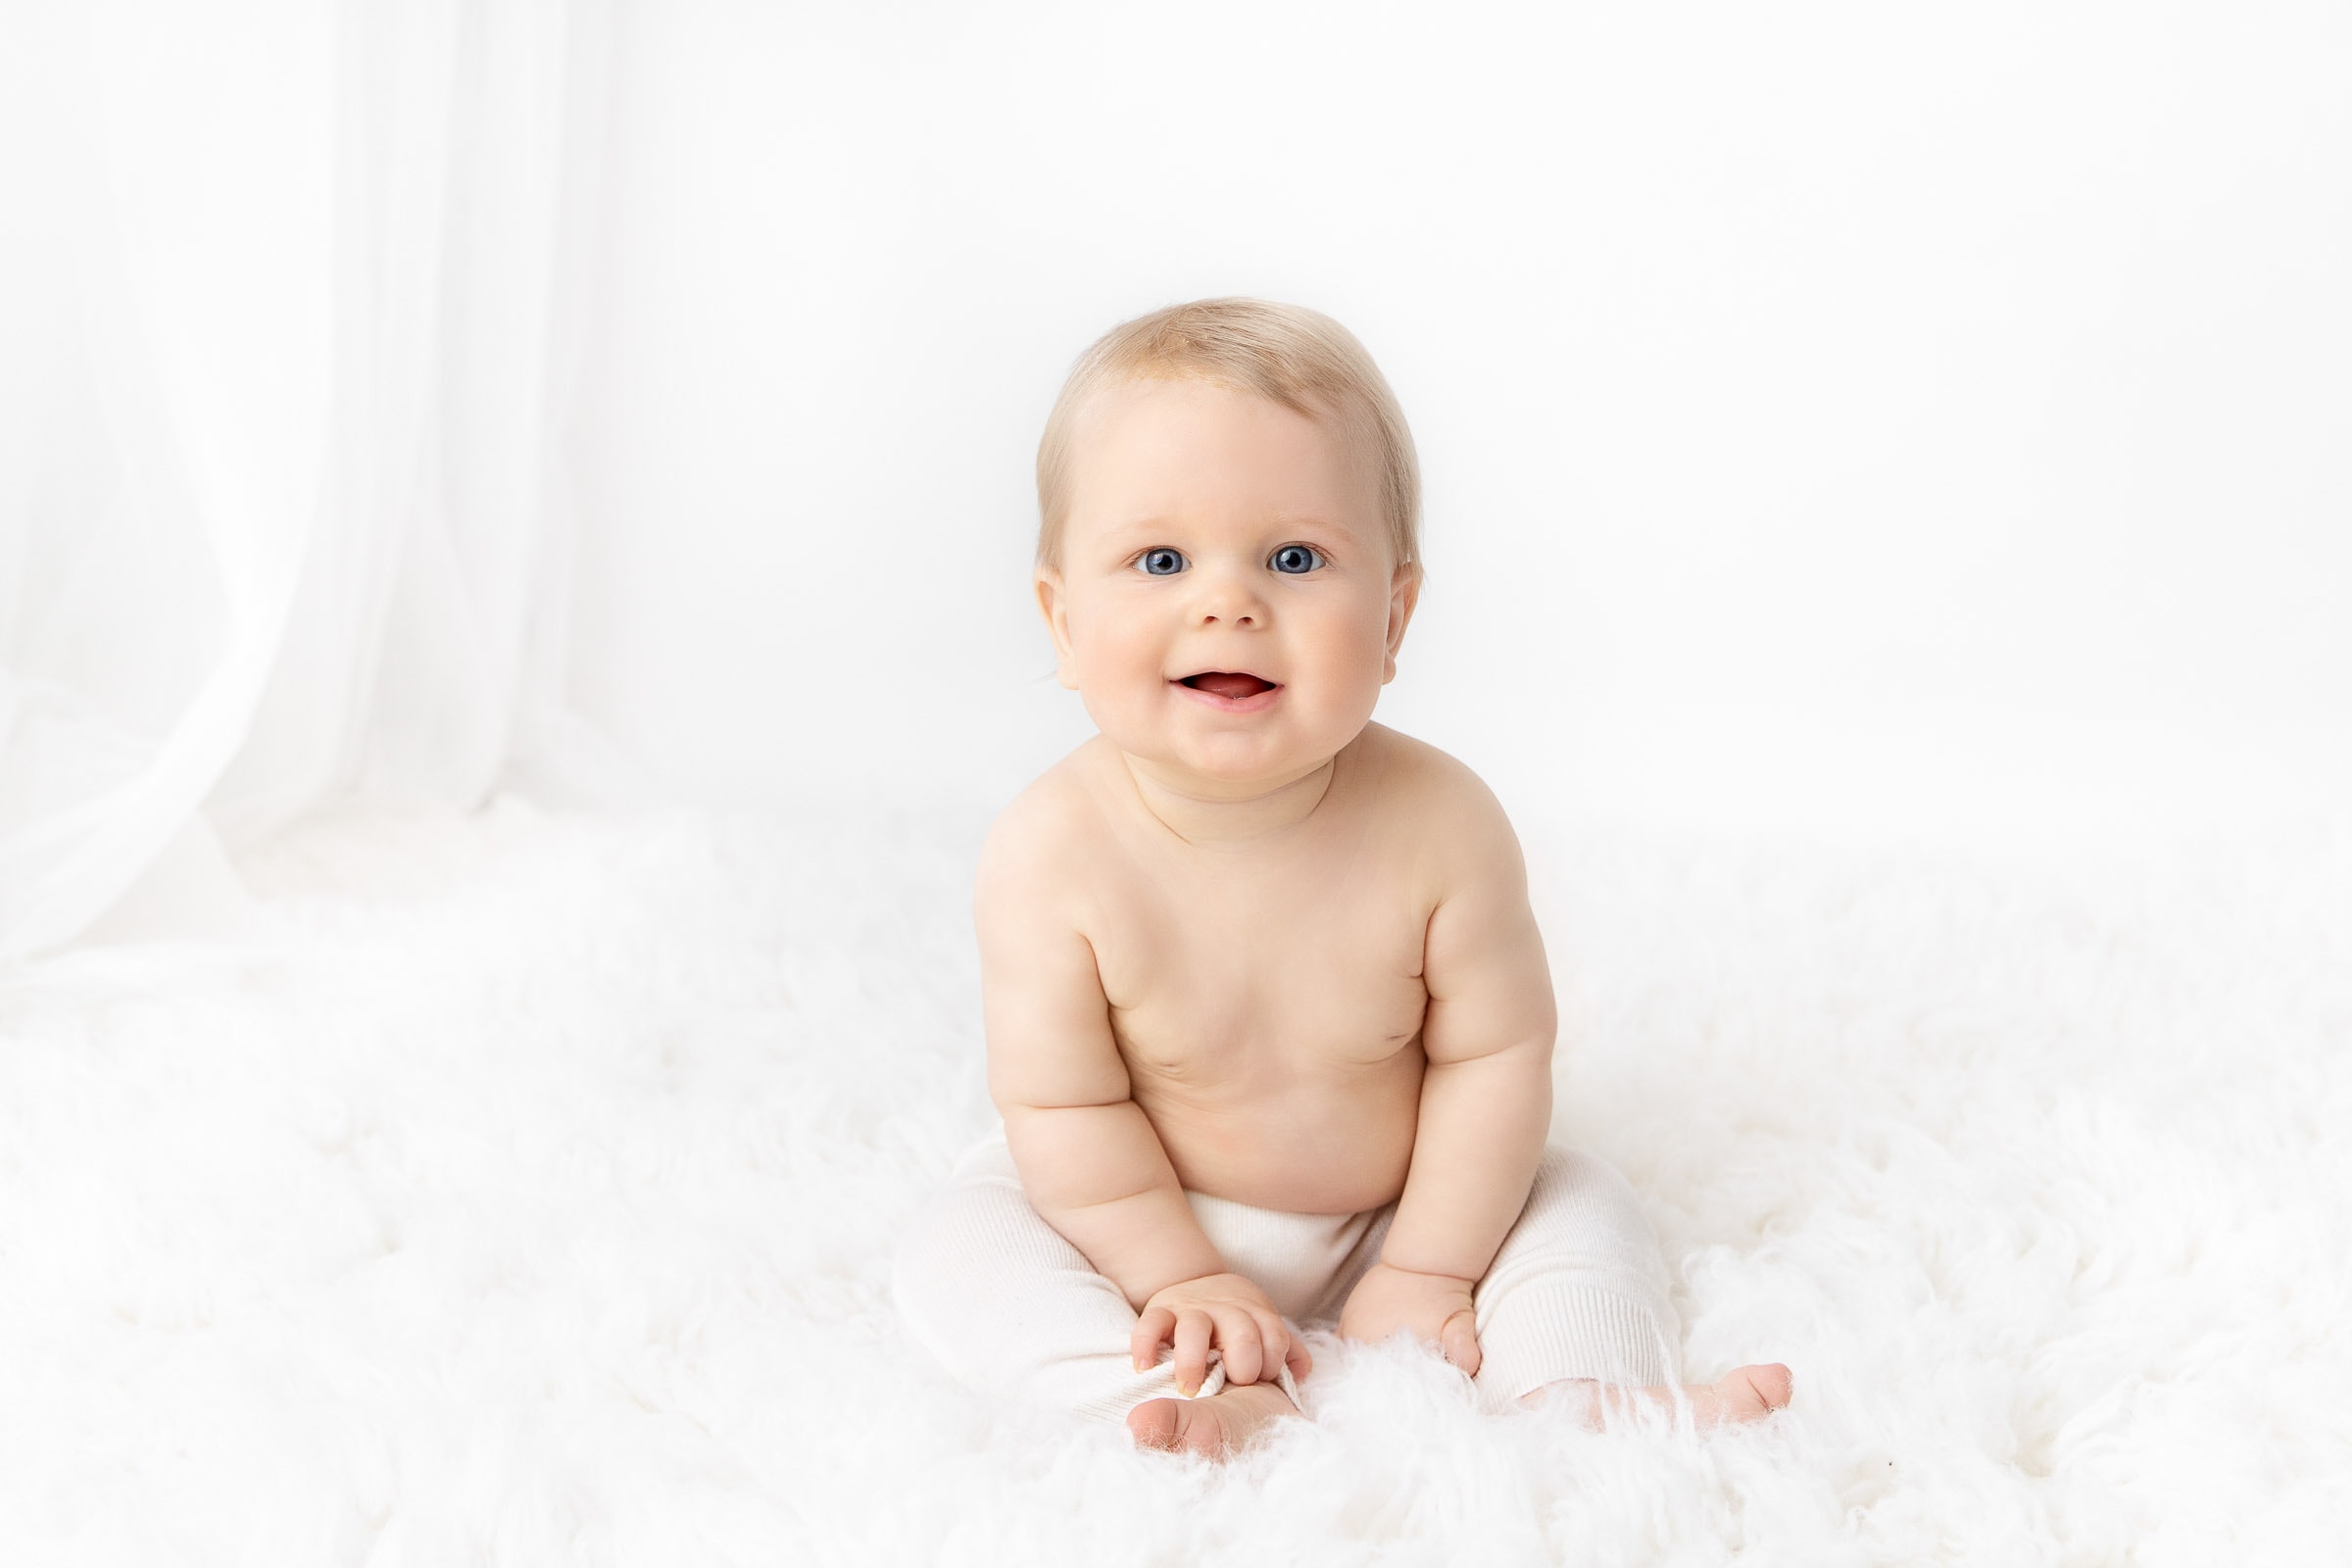 6 month old baby boy wearing white pants sitting on a white fur rug in a white studio smiling at camera